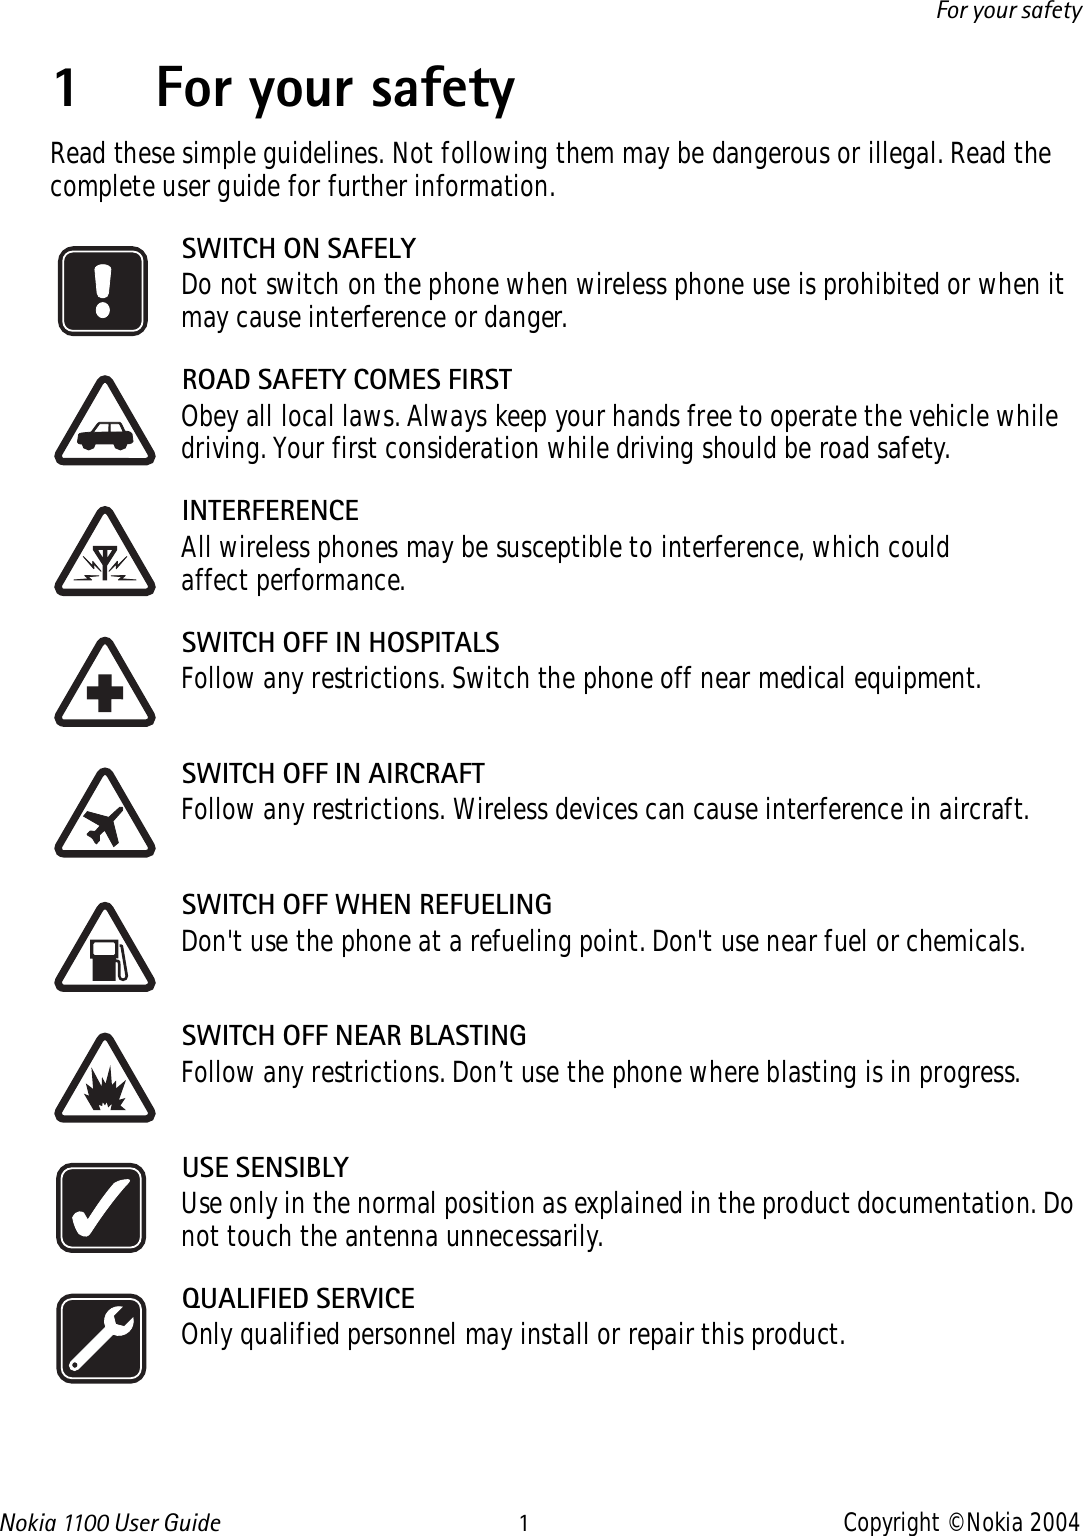 Nokia 110 0  User Guide 1Copyright © Nokia 2004For your safety1 For your safetyRead these simple guidelines. Not following them may be dangerous or illegal. Read the complete user guide for further information.SWITCH ON SAFELYDo not switch on the phone when wireless phone use is prohibited or when it may cause interference or danger.ROAD SAFETY COMES FIRSTObey all local laws. Always keep your hands free to operate the vehicle while driving. Your first consideration while driving should be road safety.INTERFERENCEAll wireless phones may be susceptible to interference, which could affect performance.SWITCH OFF IN HOSPITALSFollow any restrictions. Switch the phone off near medical equipment.SWITCH OFF IN AIRCRAFTFollow any restrictions. Wireless devices can cause interference in aircraft.SWITCH OFF WHEN REFUELINGDon&apos;t use the phone at a refueling point. Don&apos;t use near fuel or chemicals.SWITCH OFF NEAR BLASTINGFollow any restrictions. Don’t use the phone where blasting is in progress.USE SENSIBLYUse only in the normal position as explained in the product documentation. Do not touch the antenna unnecessarily.QUALIFIED SERVICEOnly qualified personnel may install or repair this product.